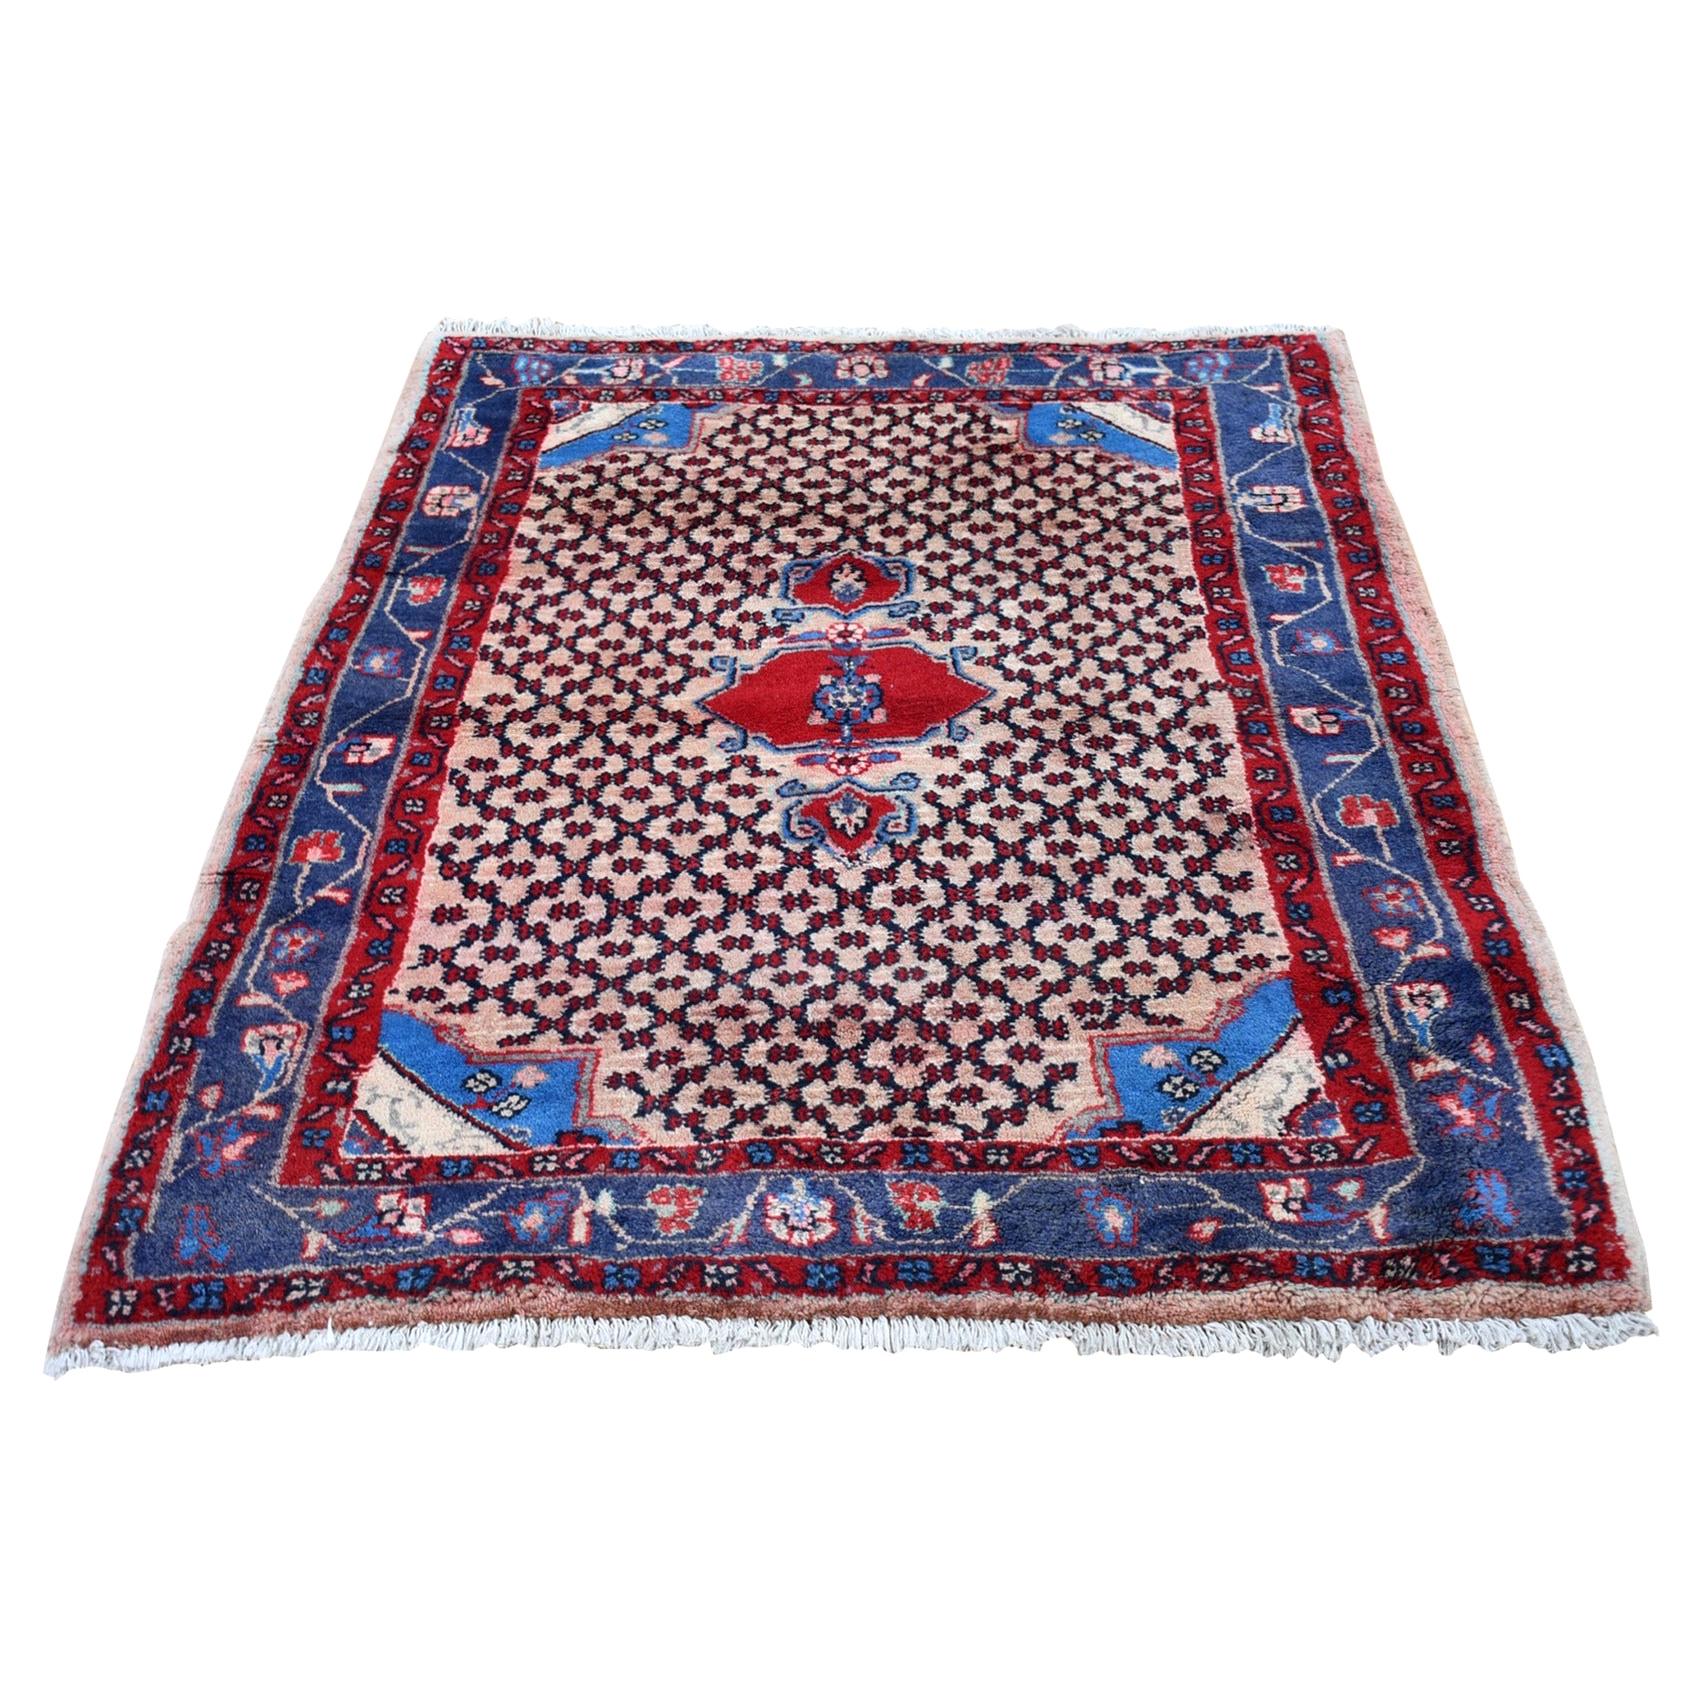 Vintage Persian Hamadan with Camel Hair Organic Wool Hand Knotted Oriental Rug